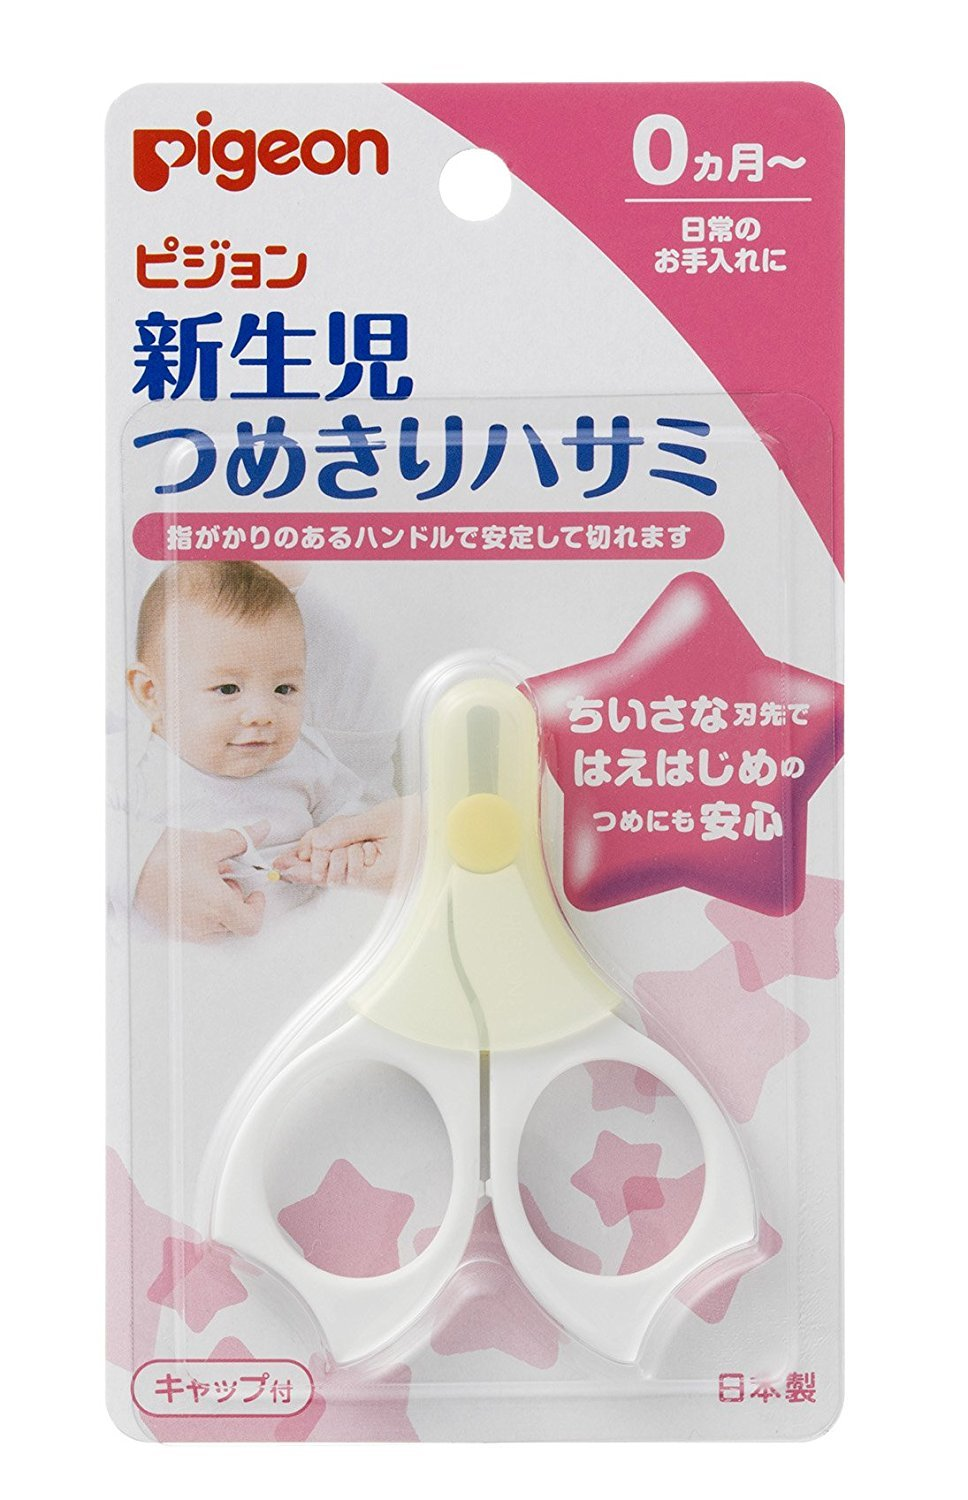 Pigeon Baby Nail Trimmers